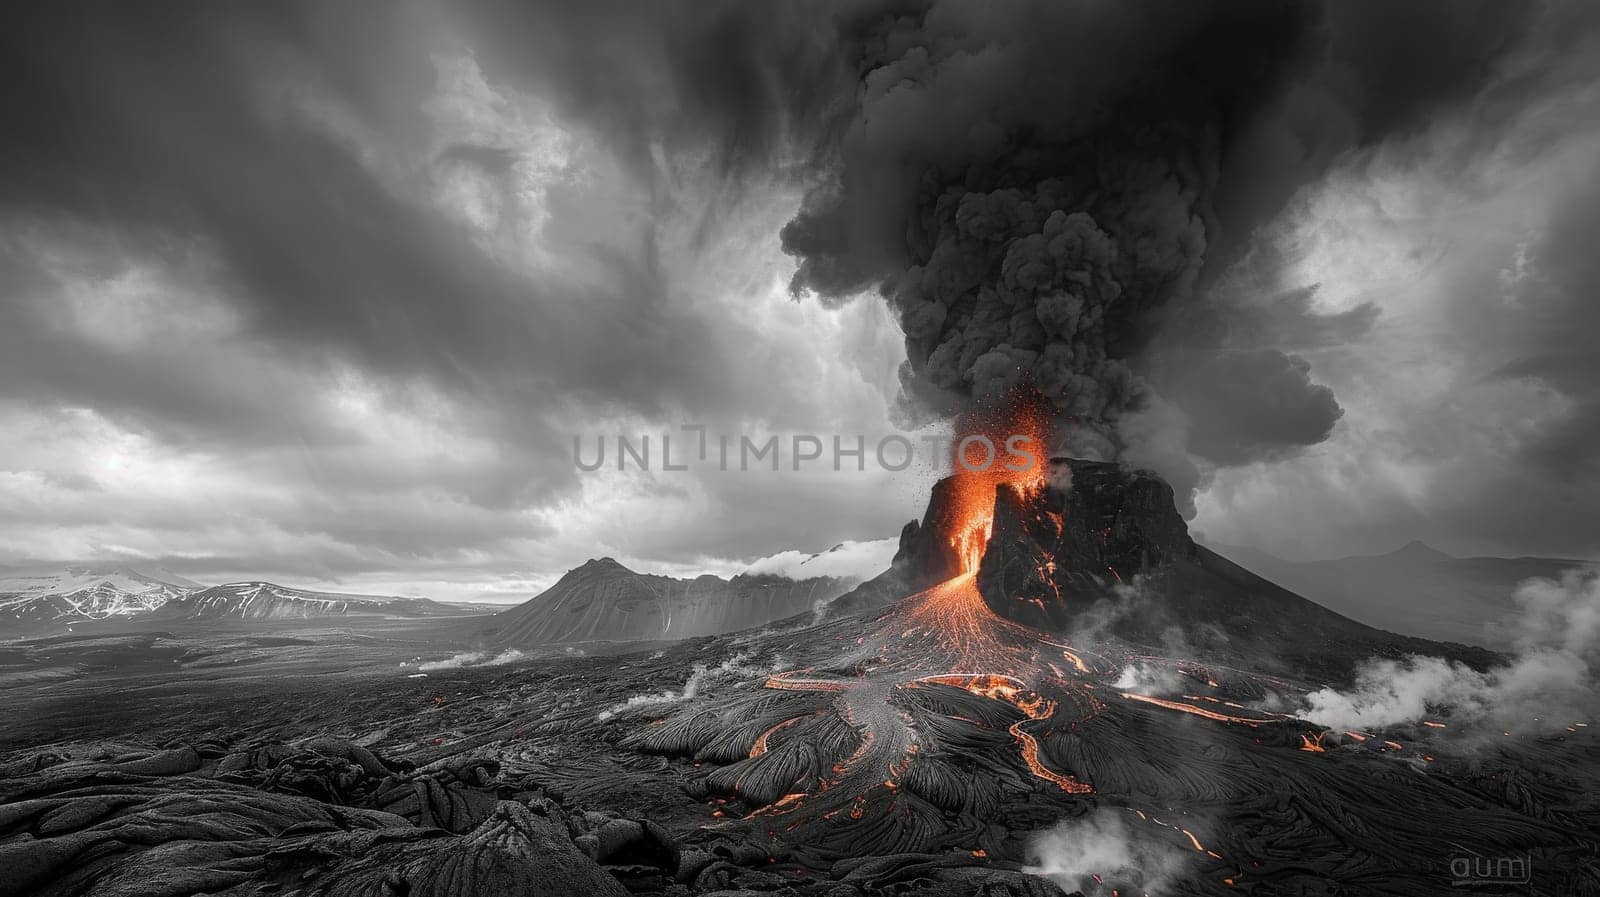 A black and white photo of a volcano with smoke and ash spewing from it by itchaznong